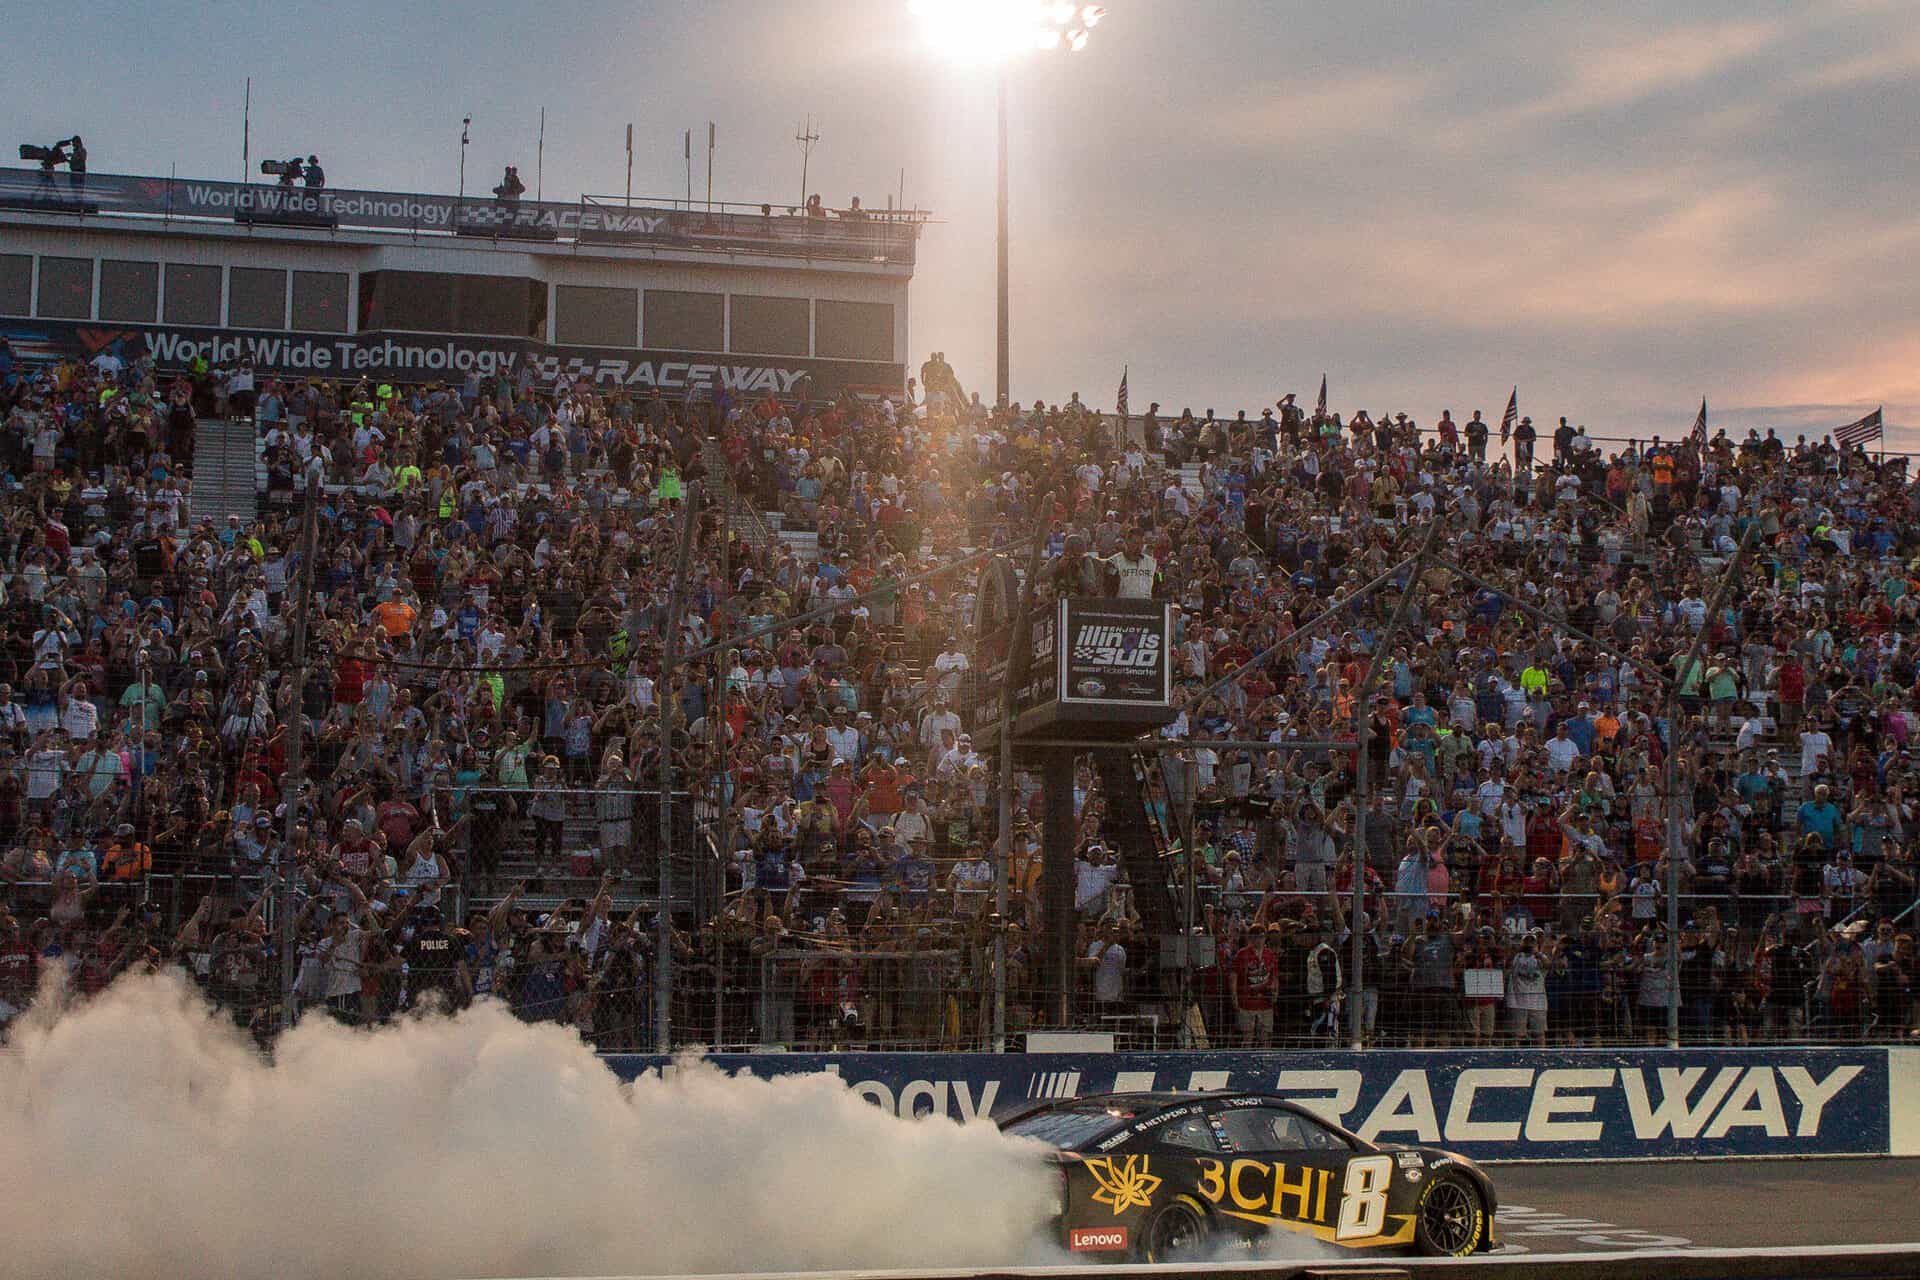 Kyle Busch gives the crowd a burnout after winning the Enjoy Illinois 300 at World Wide Technology Raceway.